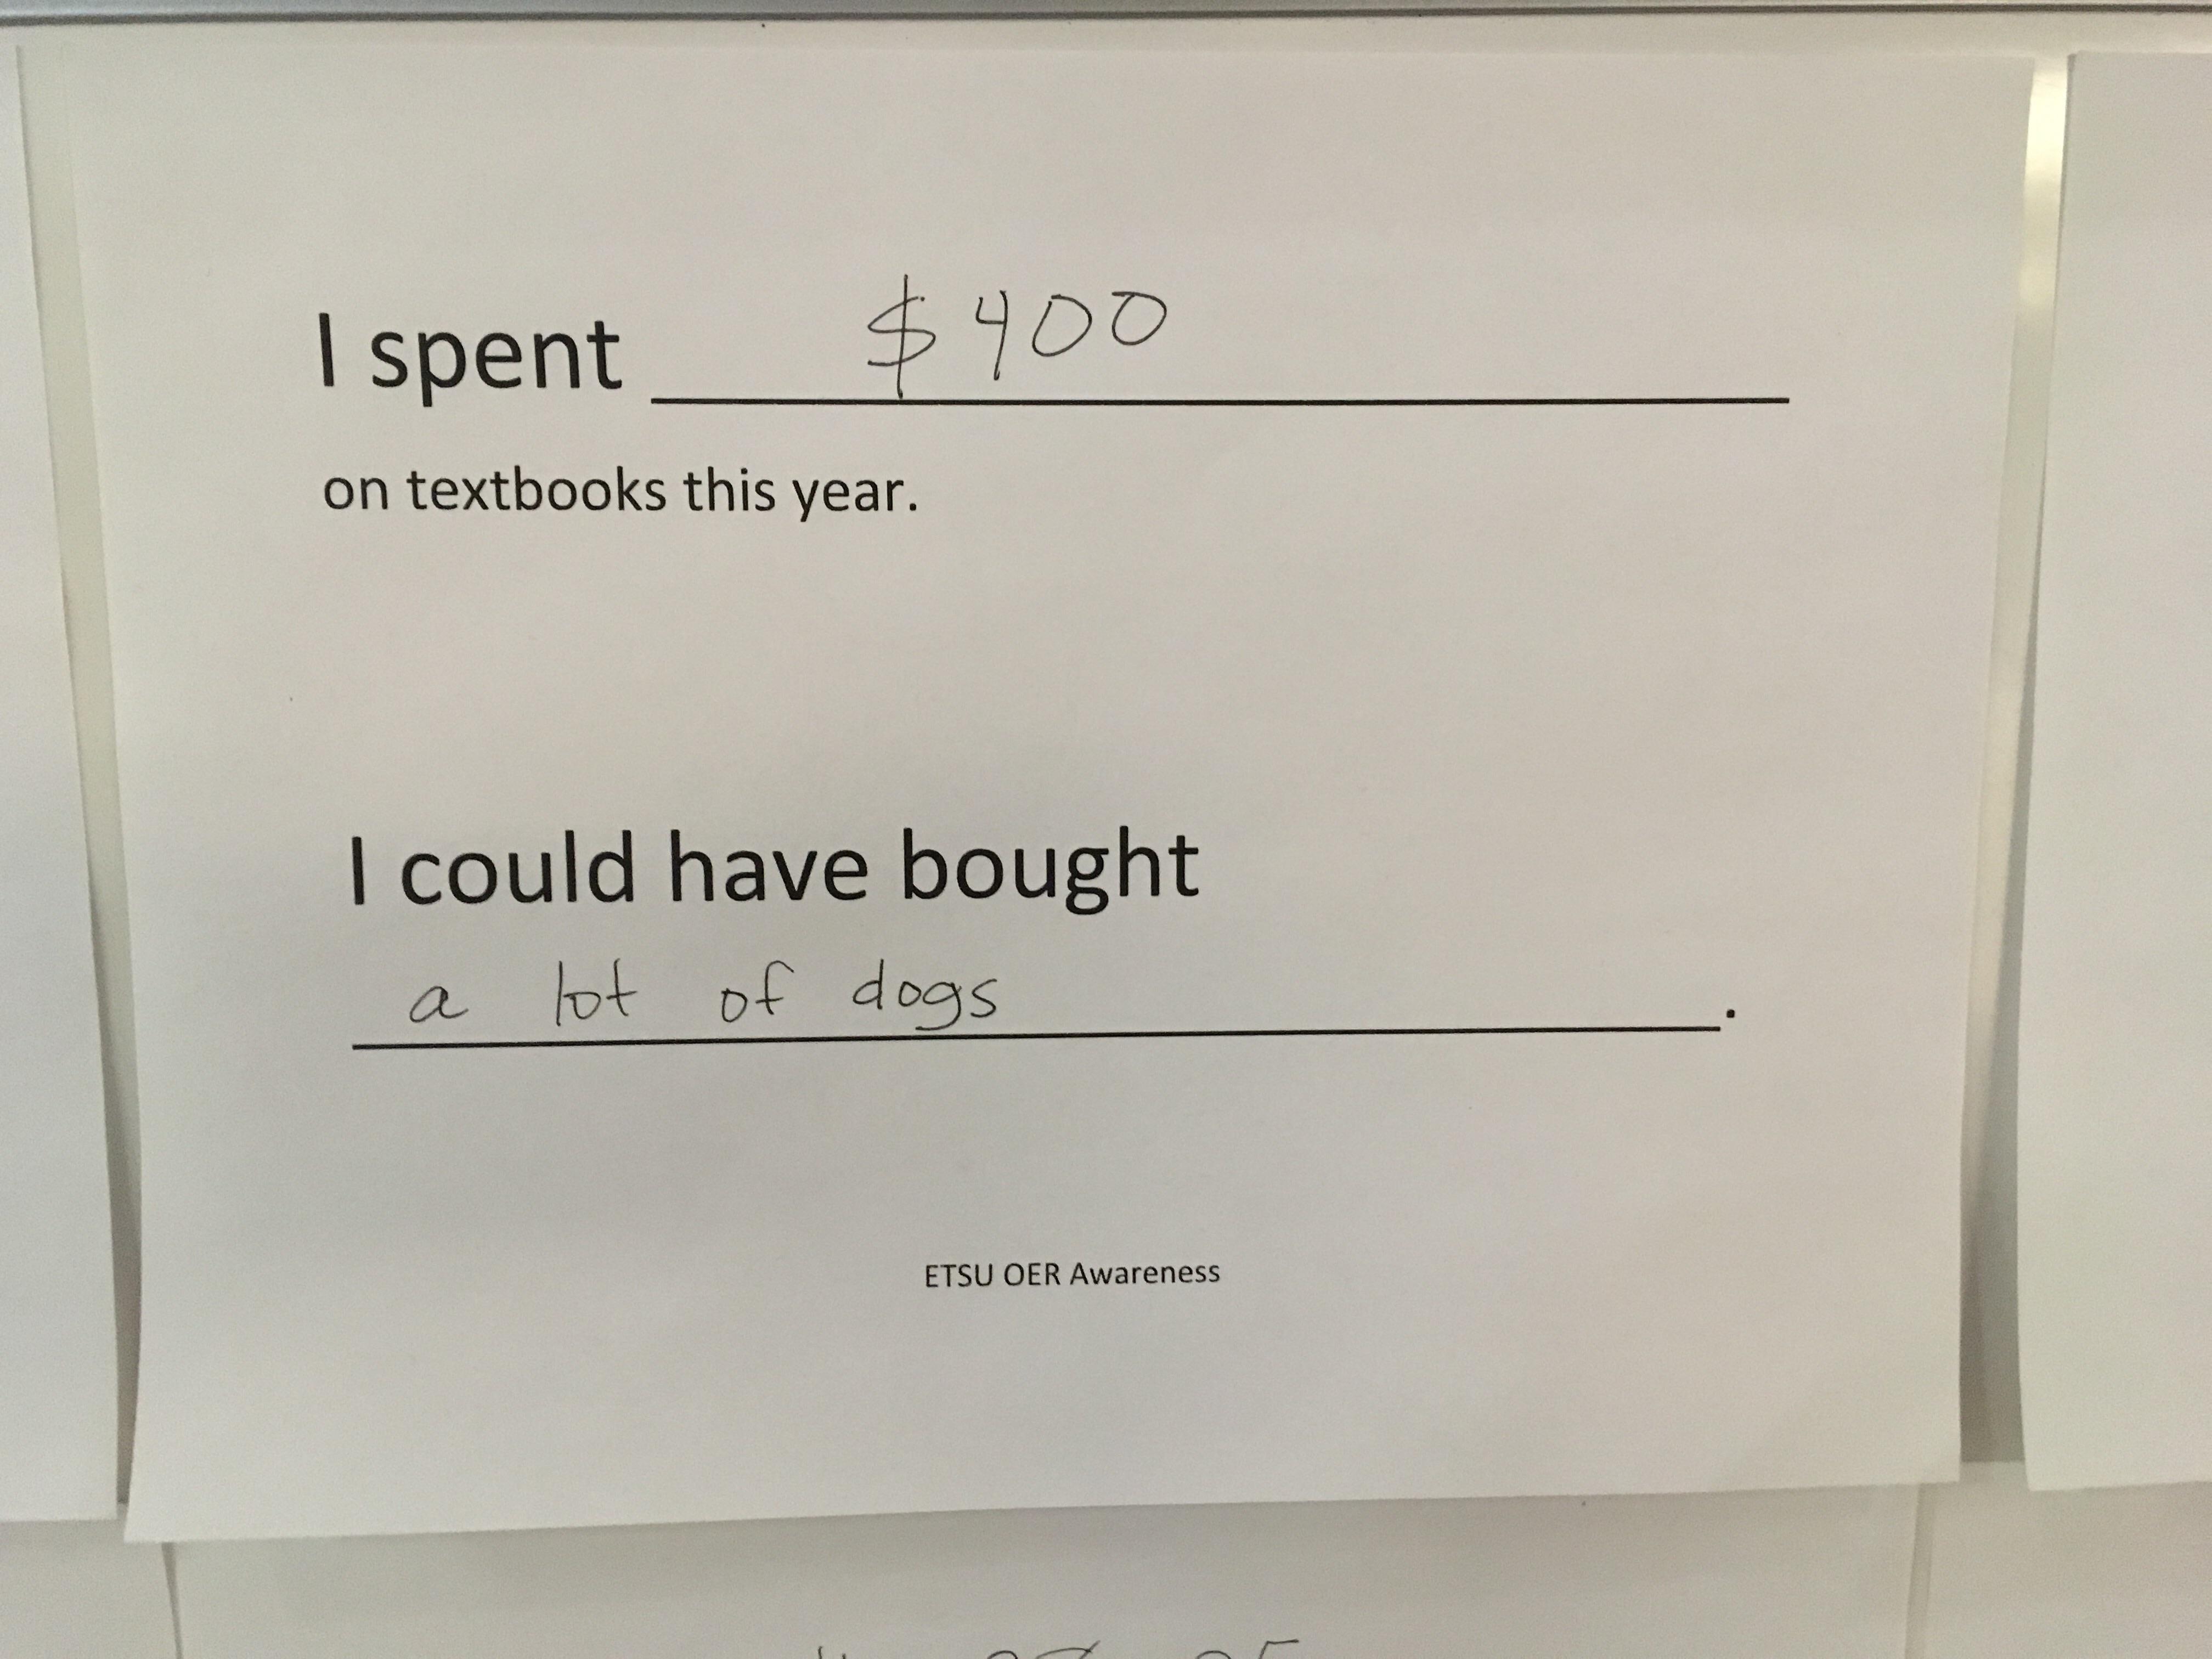 A better use of textbook money...